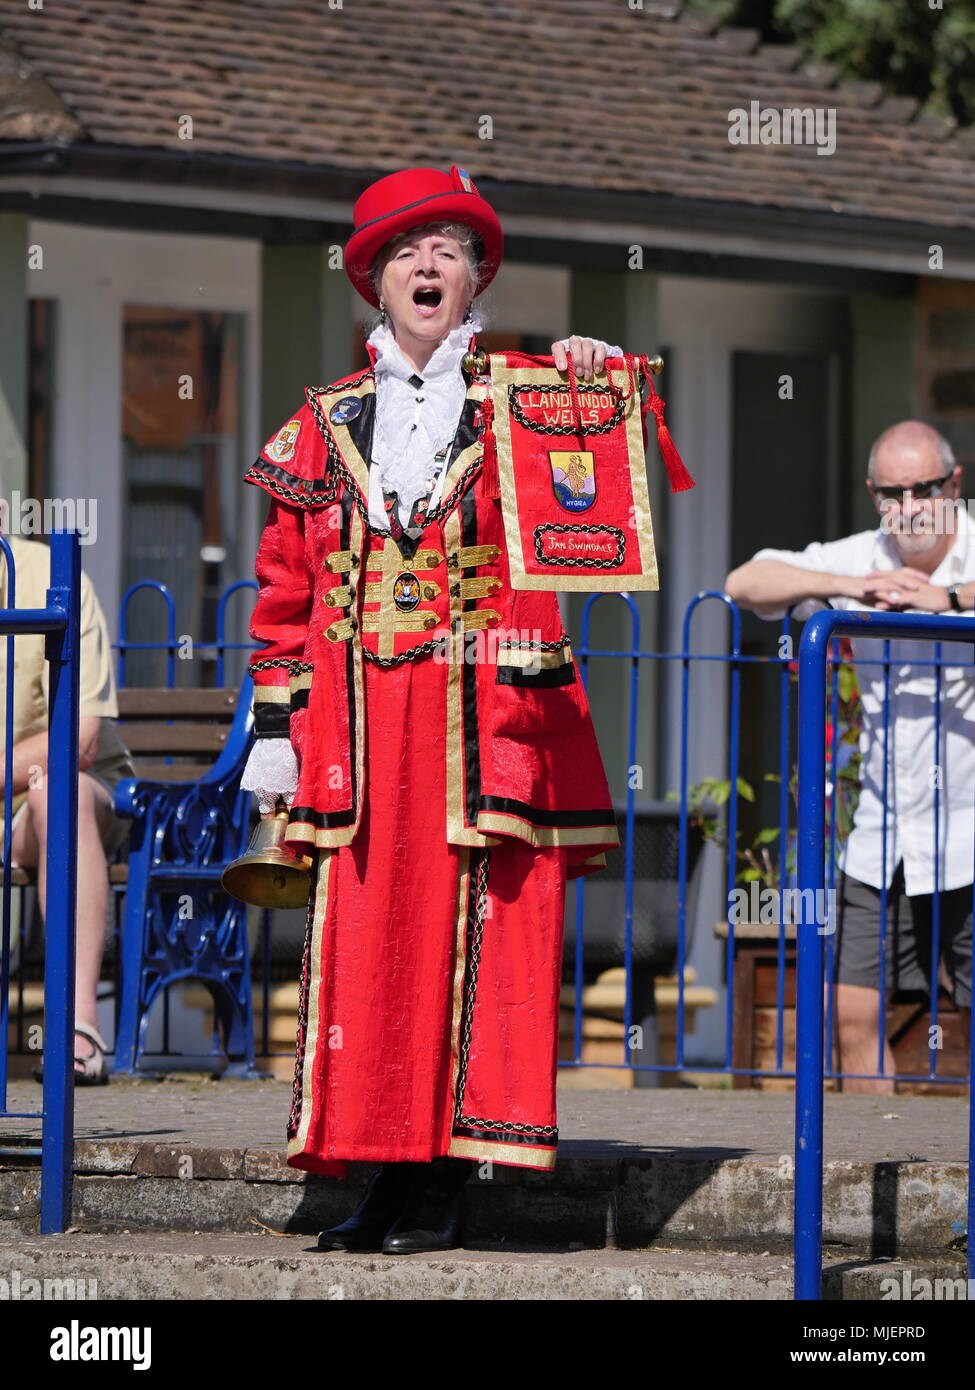 Bromyard, UK. 5th May, 2018. The Bromyard Town Criers Competition held on 5th May 2018 in Bromyard, Herefordshire. UK. Only 8 competitors from towns around Britain took part this year -  the numbers are dwindling as the criers grow older with no new blood to replace them. Credit: Richard Sheppard/Alamy Live News Stock Photo